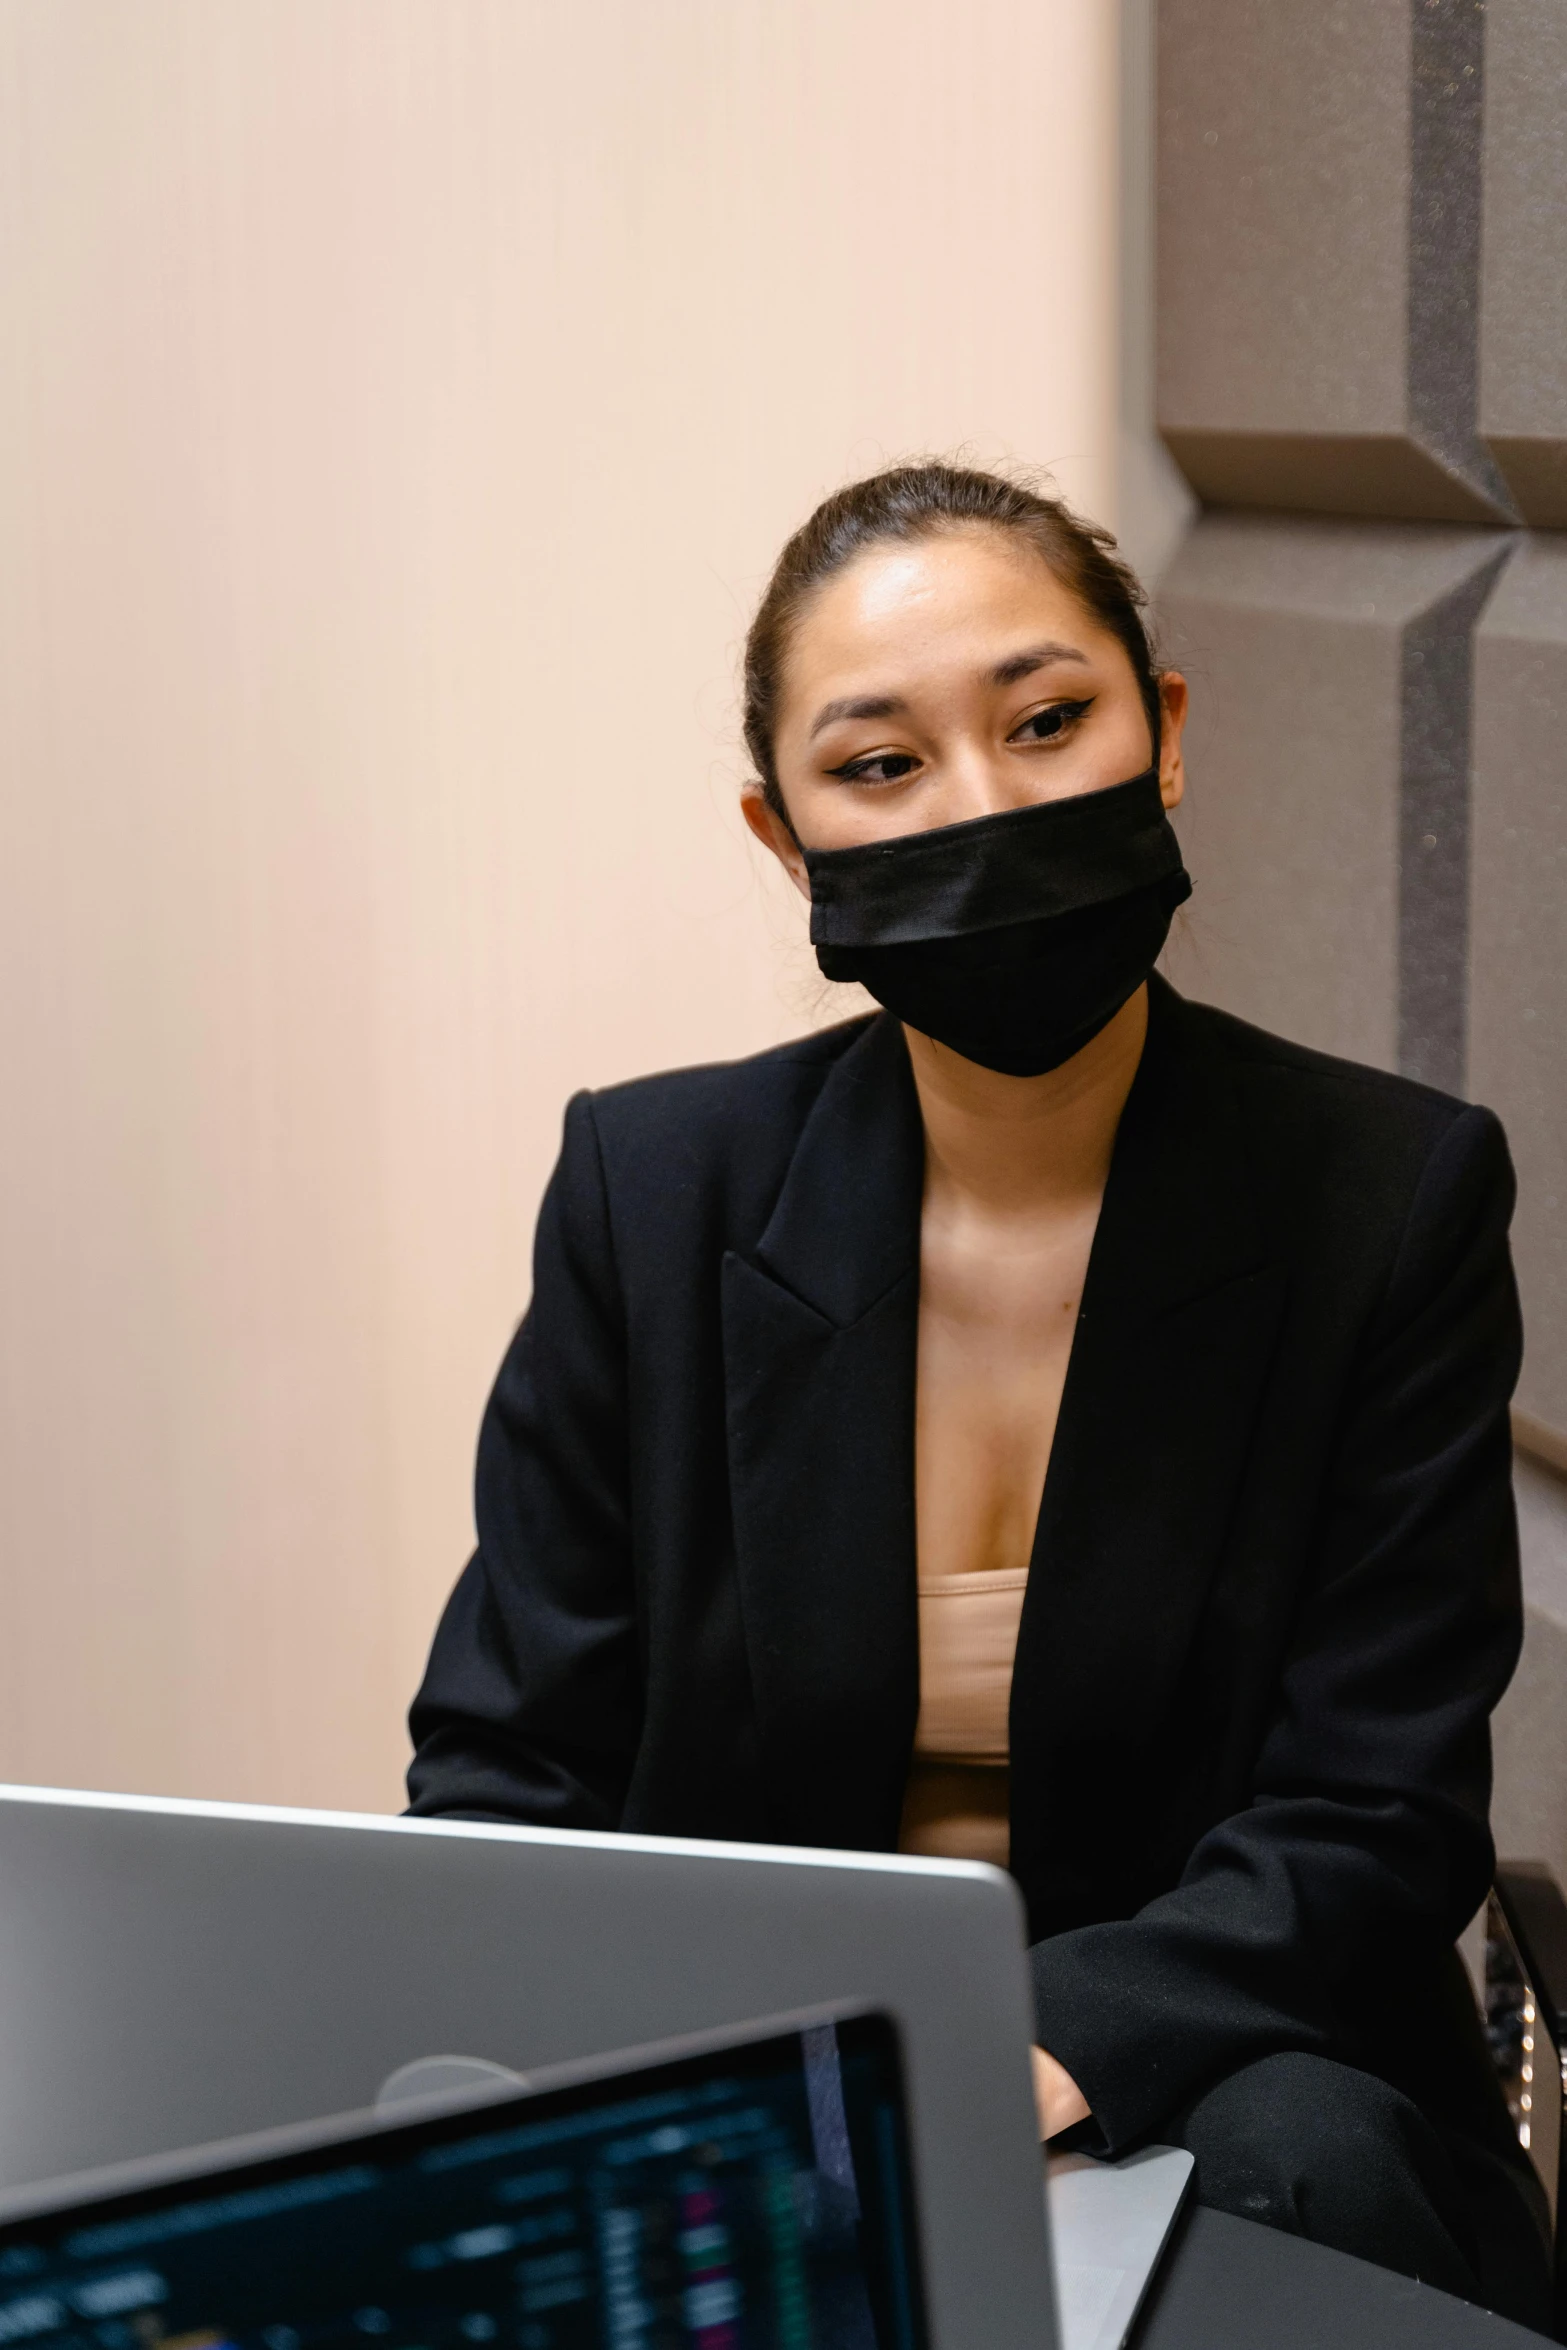 a woman sitting in front of a laptop wearing a face mask, wearing a black noble suit, ashteroth, deayami kojima, high quality image